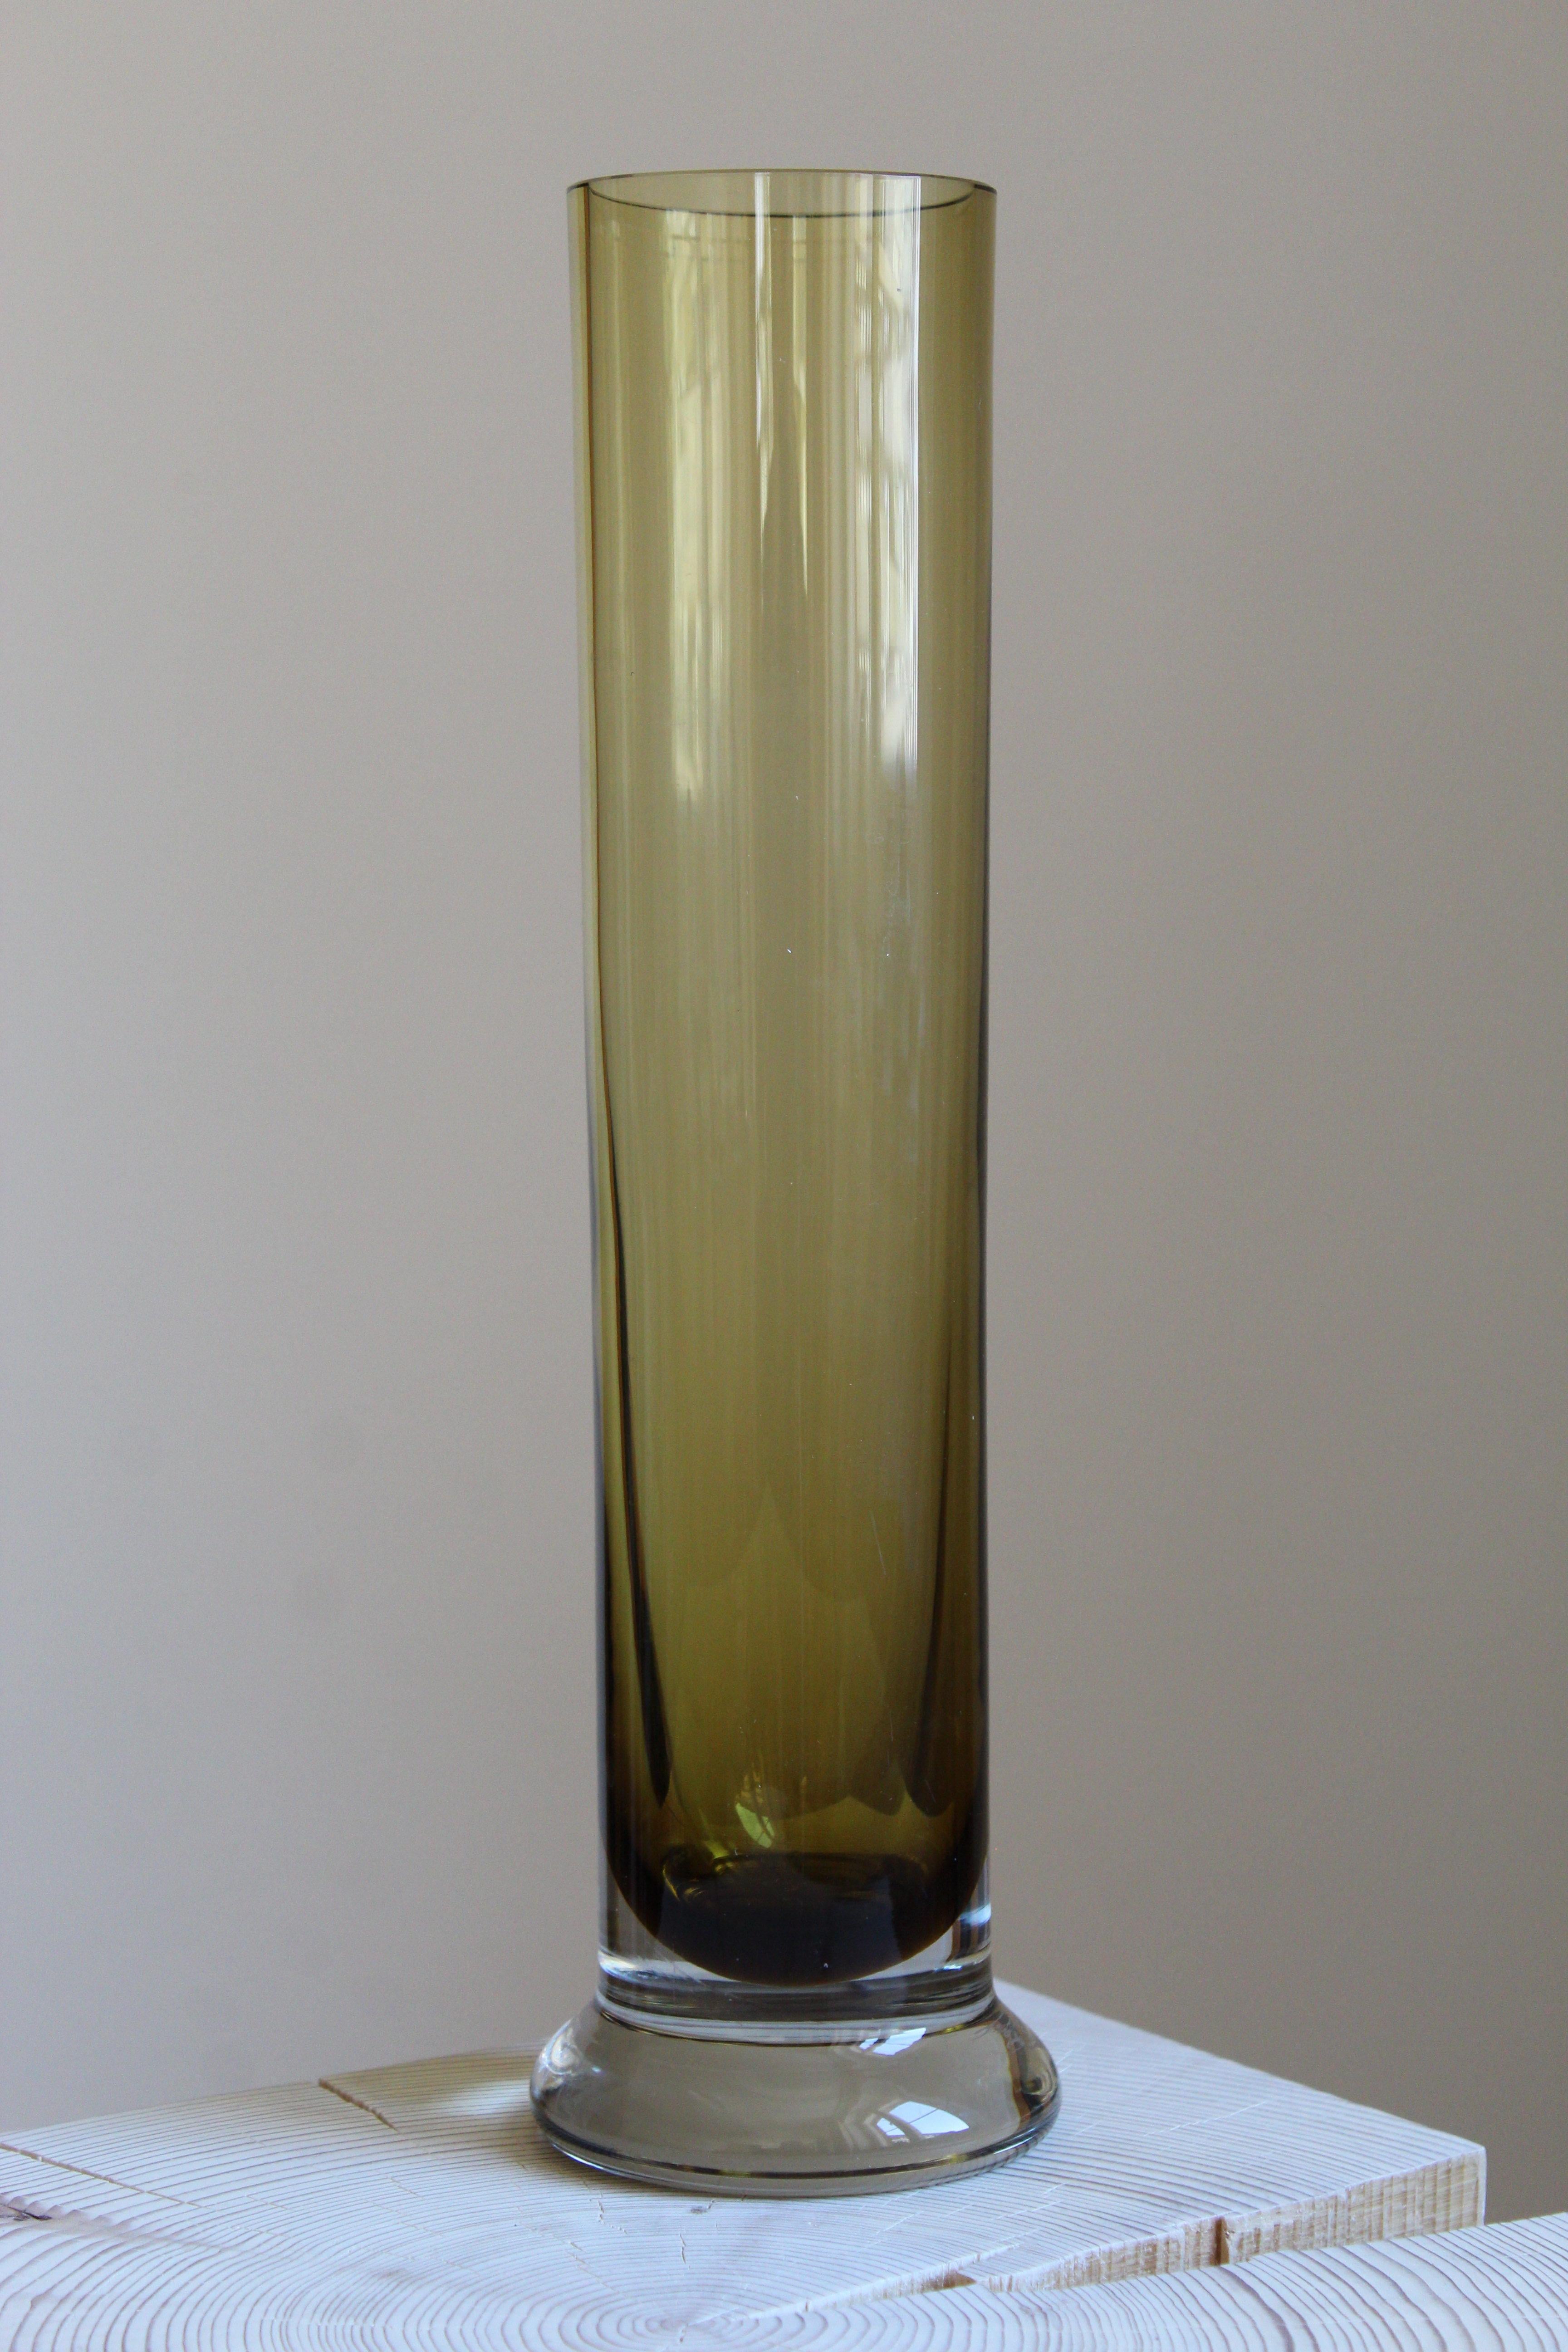 A vase designed by Unto Suominen, produced by Iittala, Finland, 1964. Signed and dated.